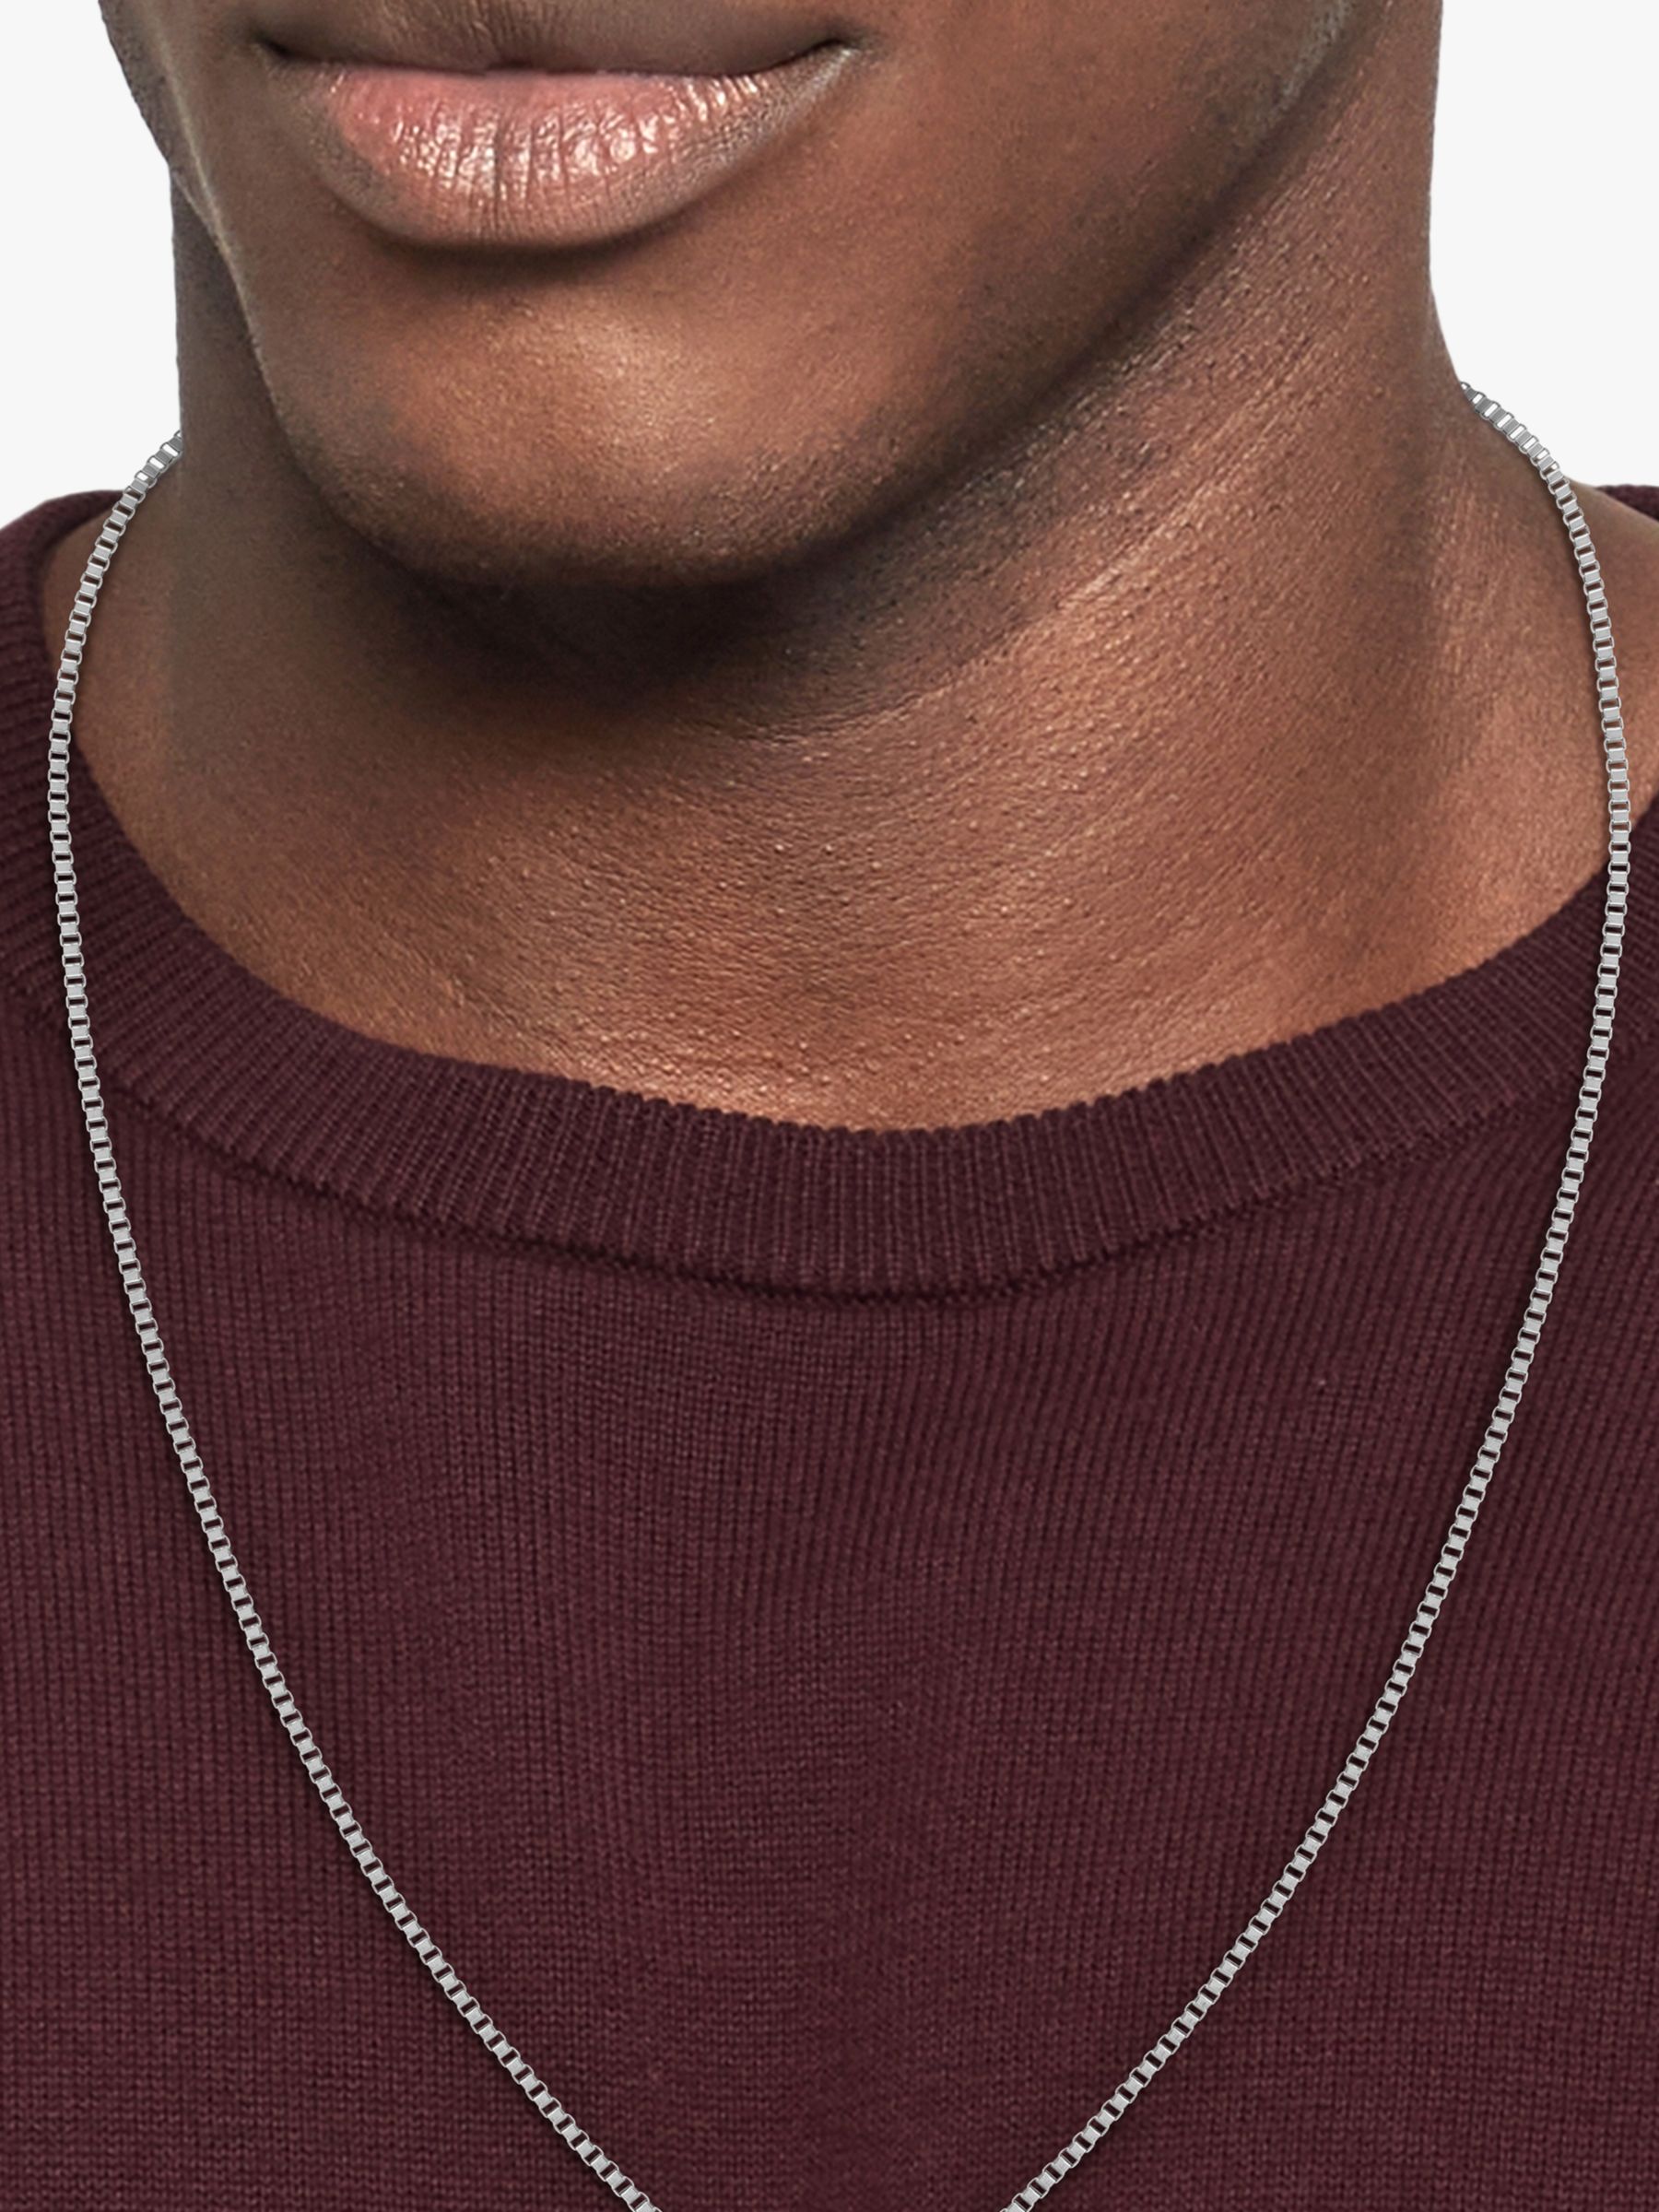 Tommy Hilfiger Men's Monogram Tag Chain Necklace, at John Lewis & Partners